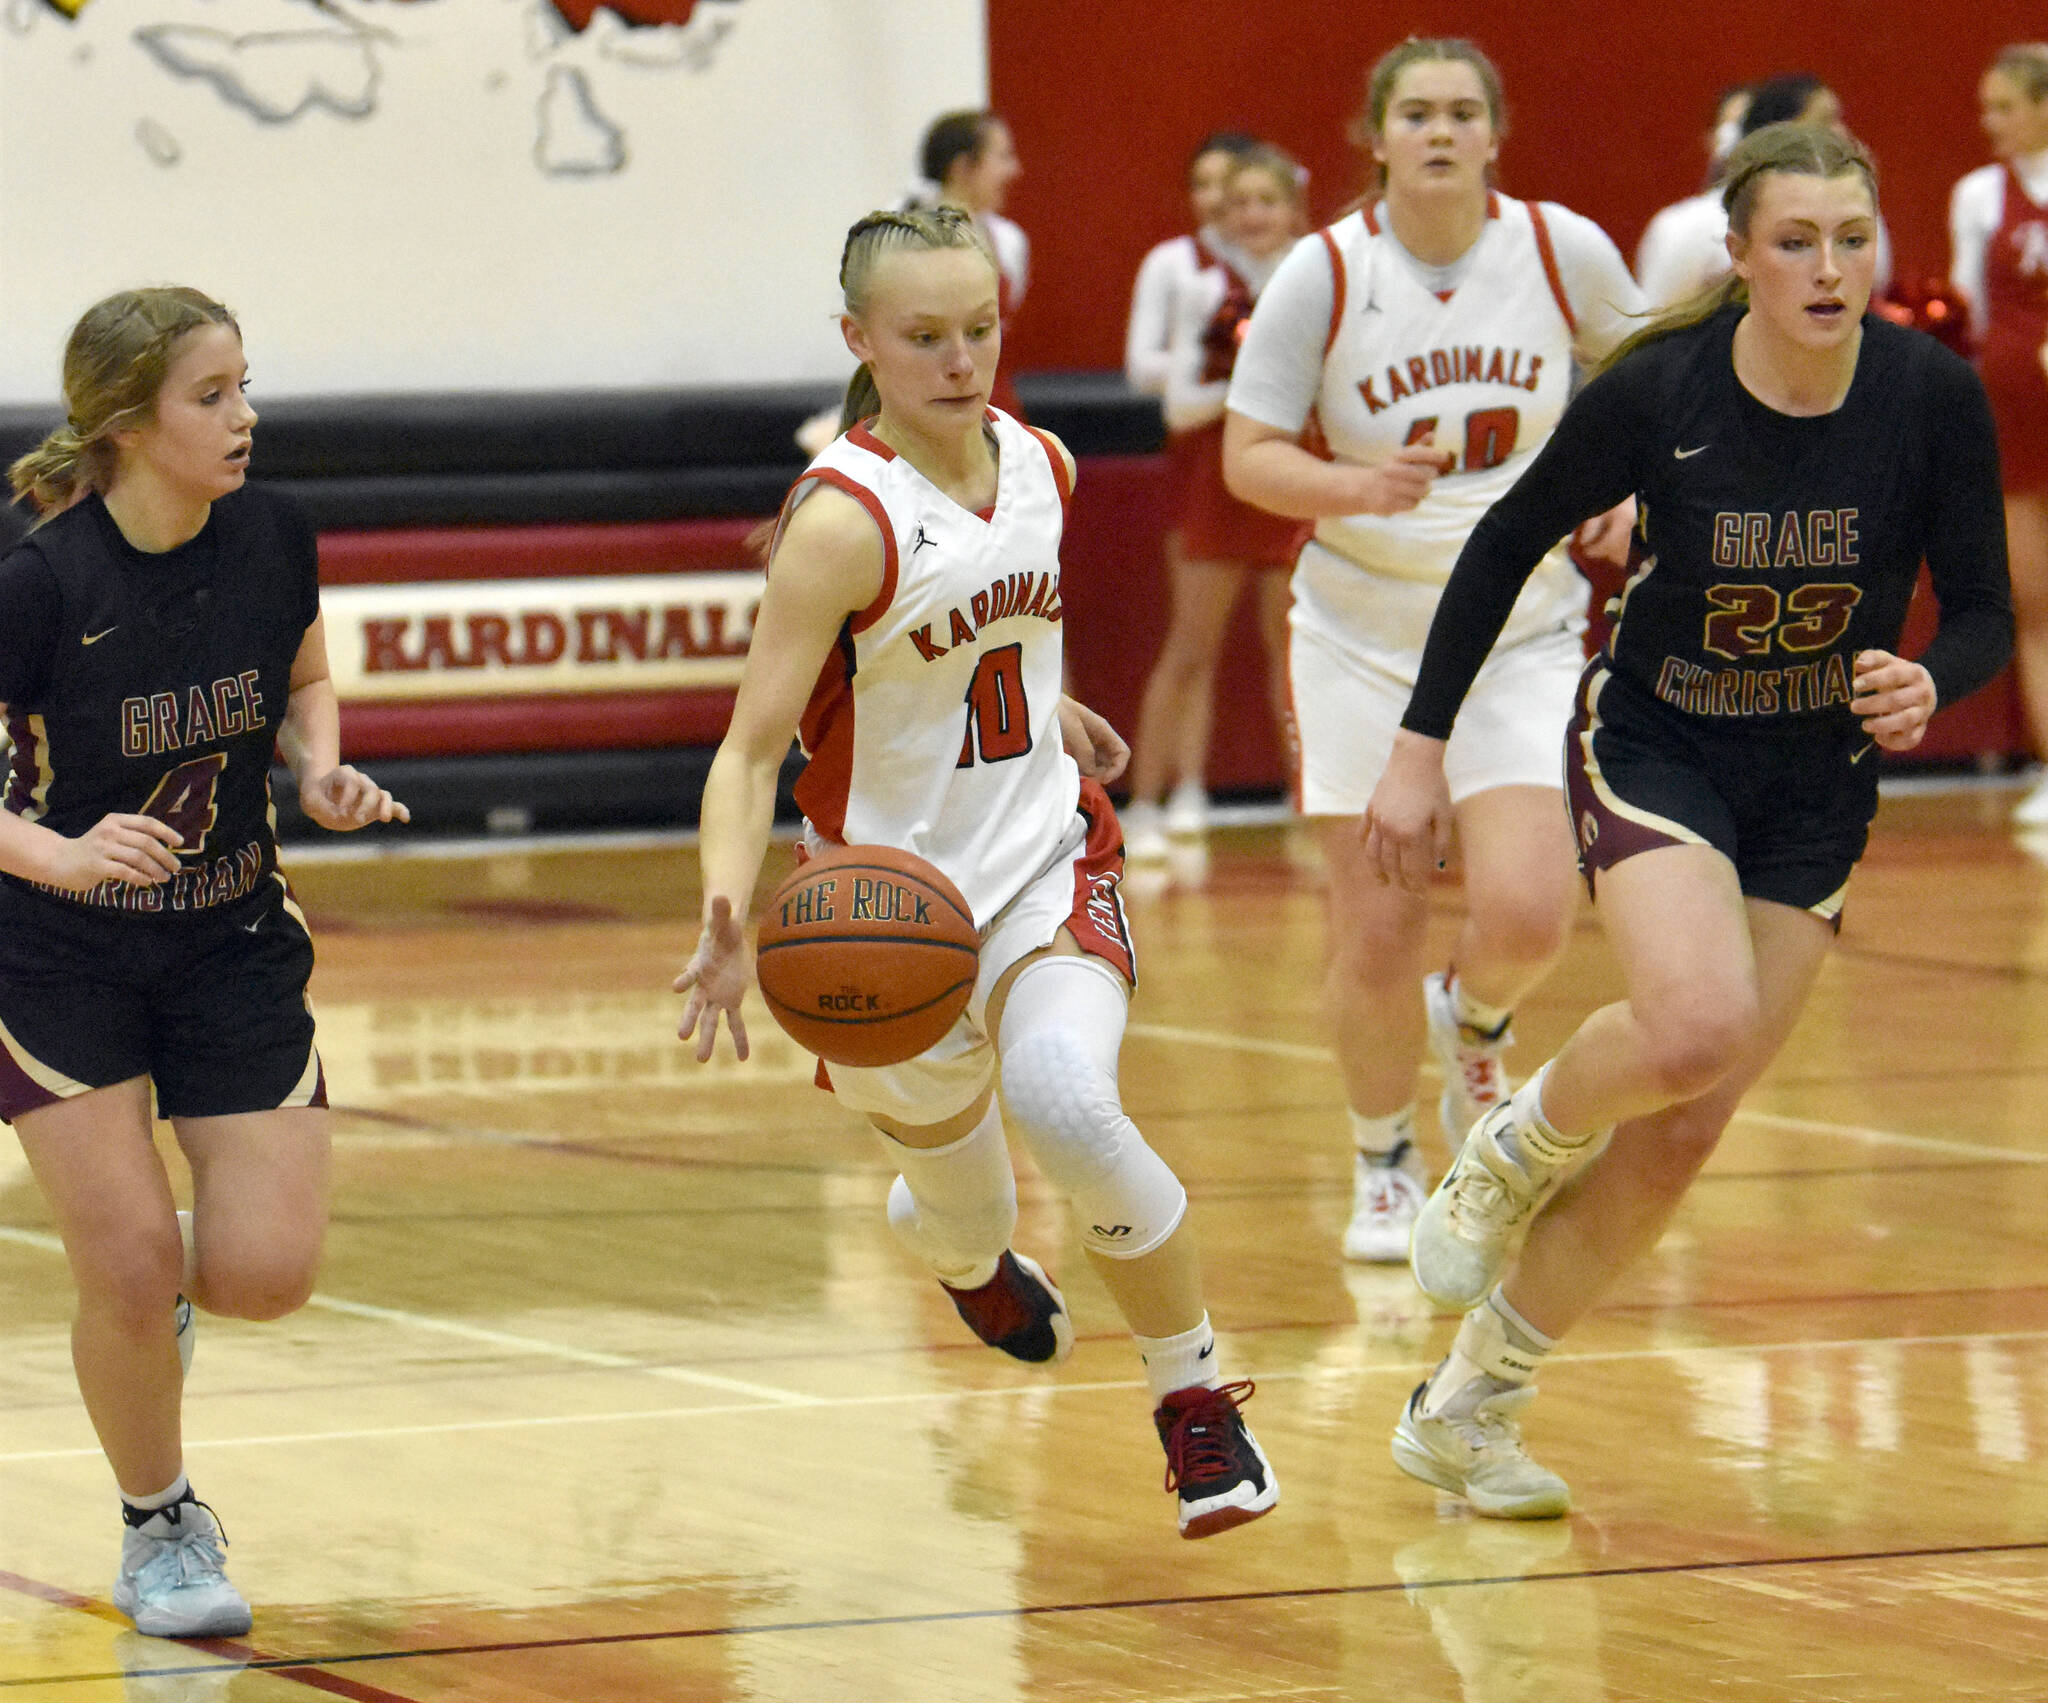 Kenai Central’s Rylie Sparks splits Grace Christian’s Poppy Wiggers-Pidduck and Sophie Lentfer on Friday, March 3, 2023, at Kenai Central High School in Kenai, Alaska. (Photo by Jeff Helminiak/Peninsula Clarion)